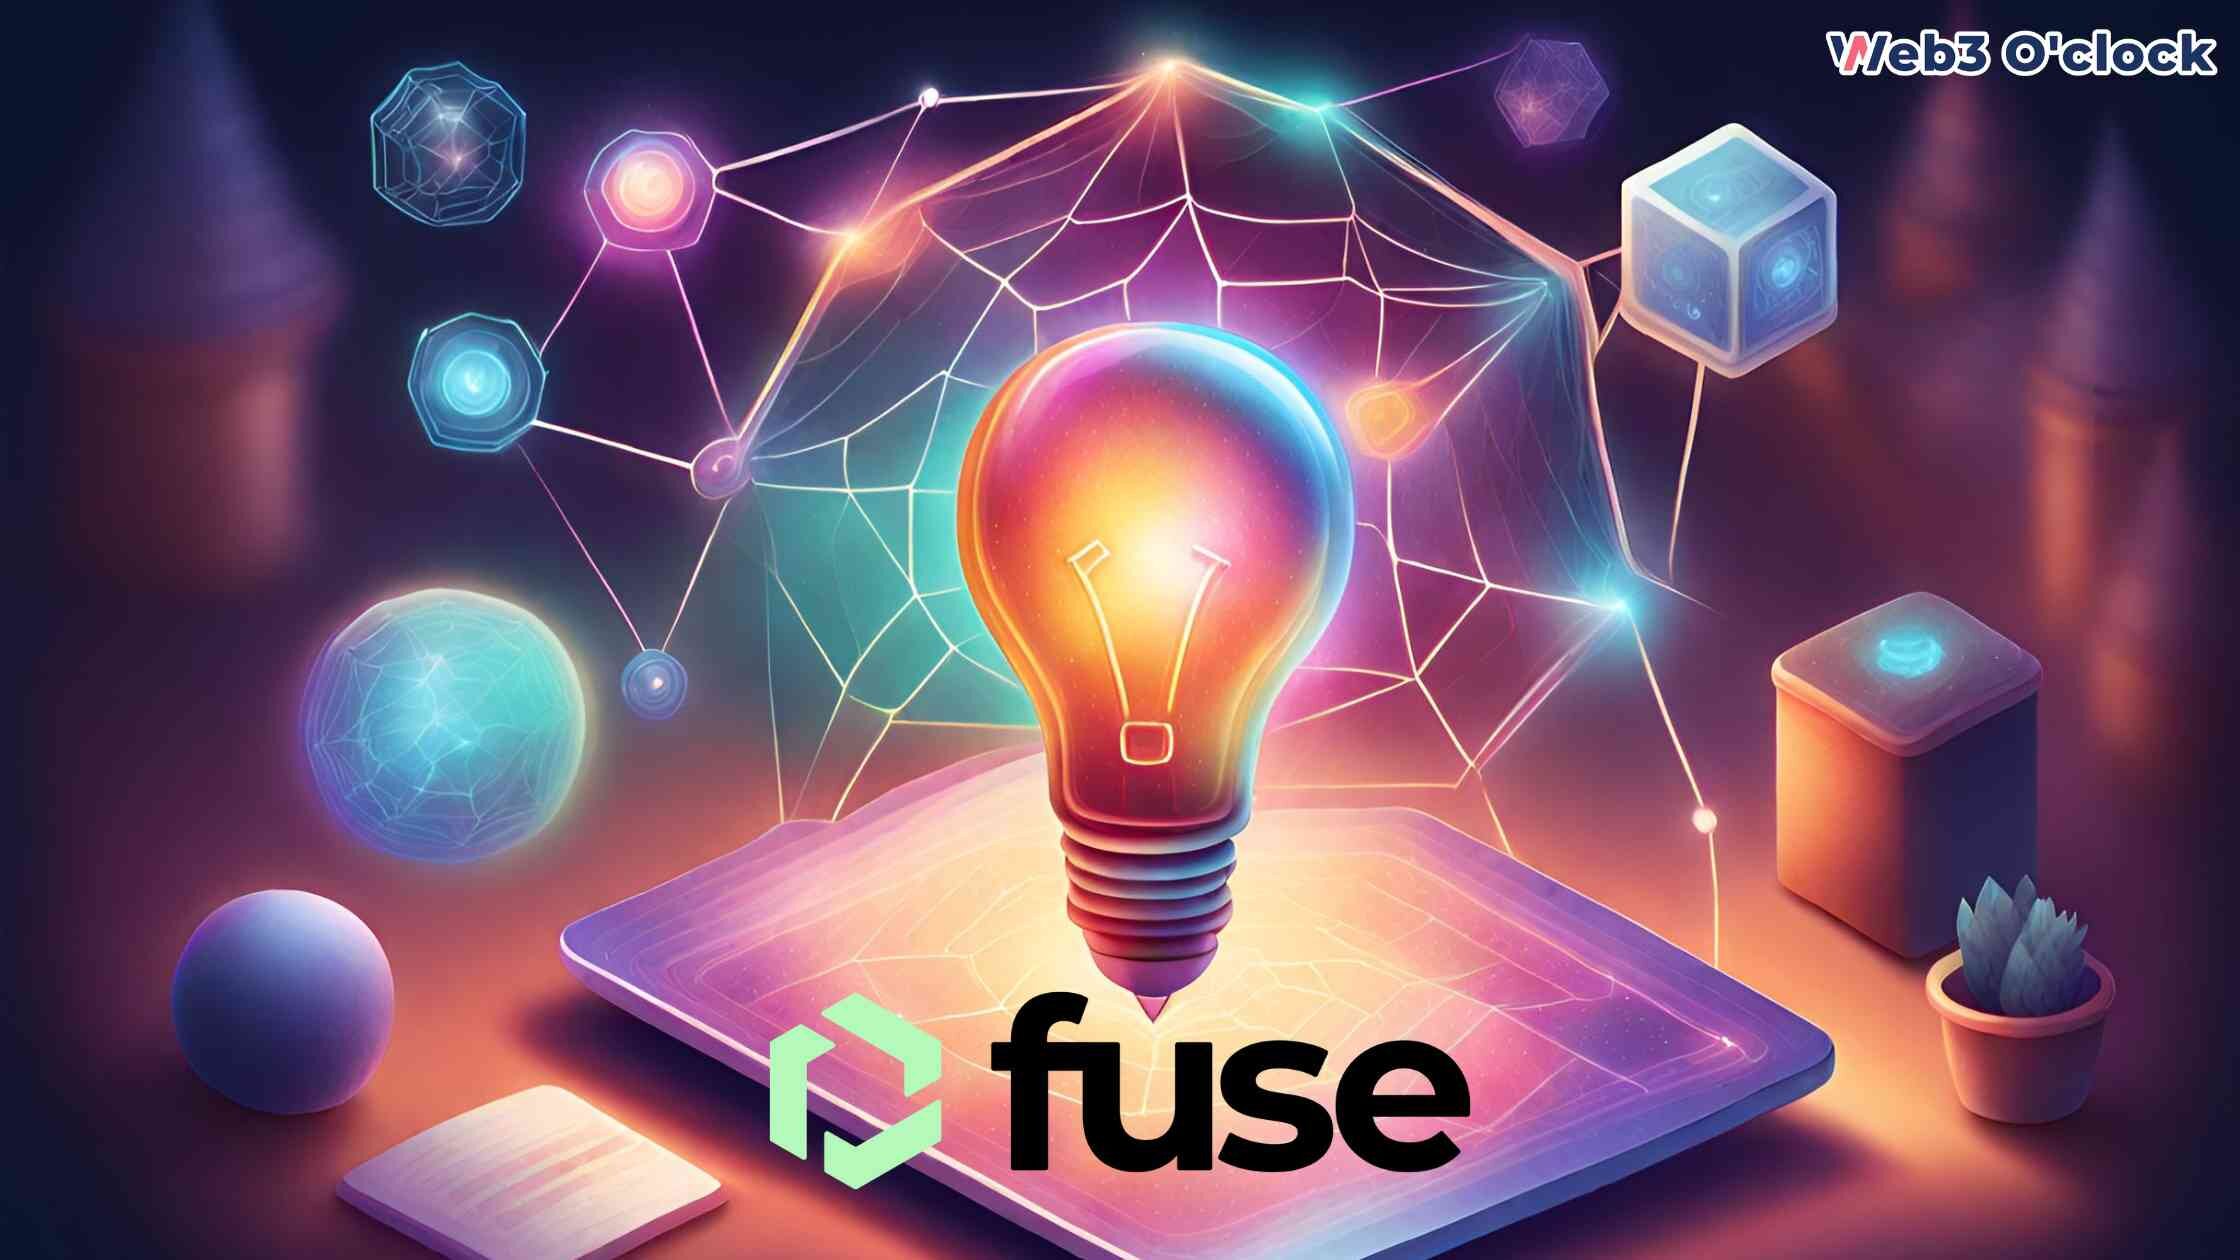 Fuse Network Unveils $10 Million by Web3oclock